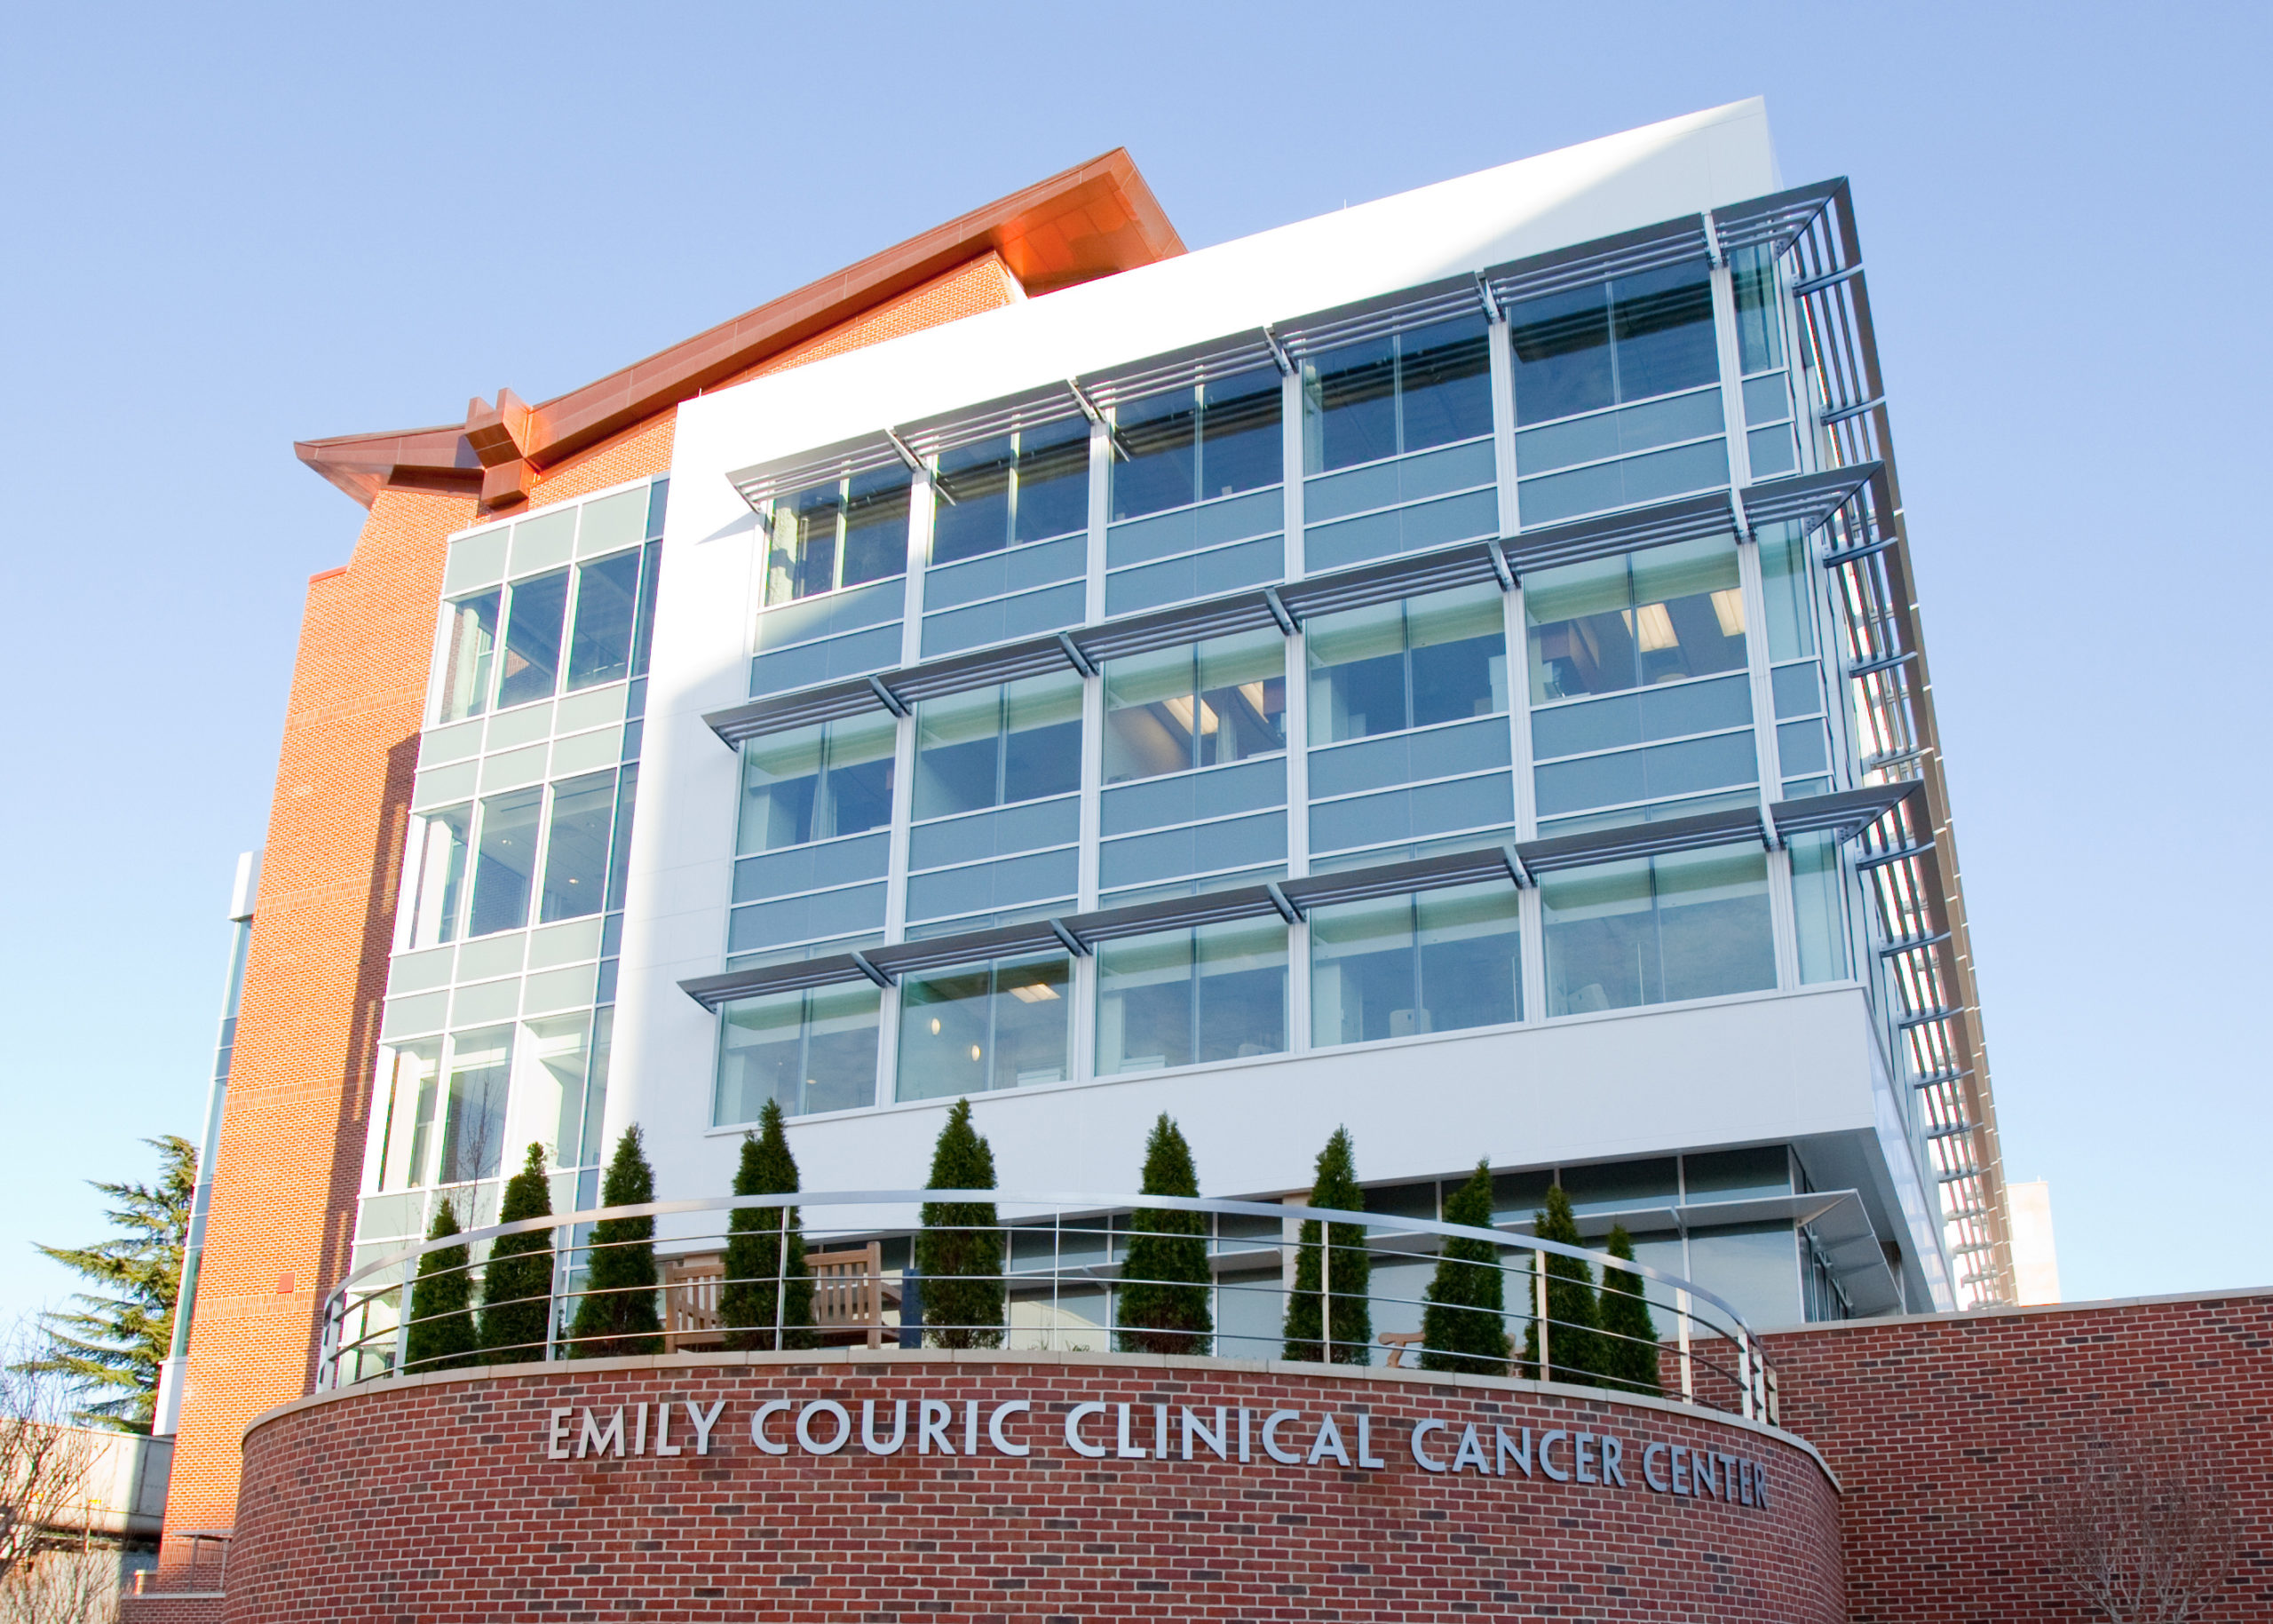 American Cancer Society Supports Promising UVA Research